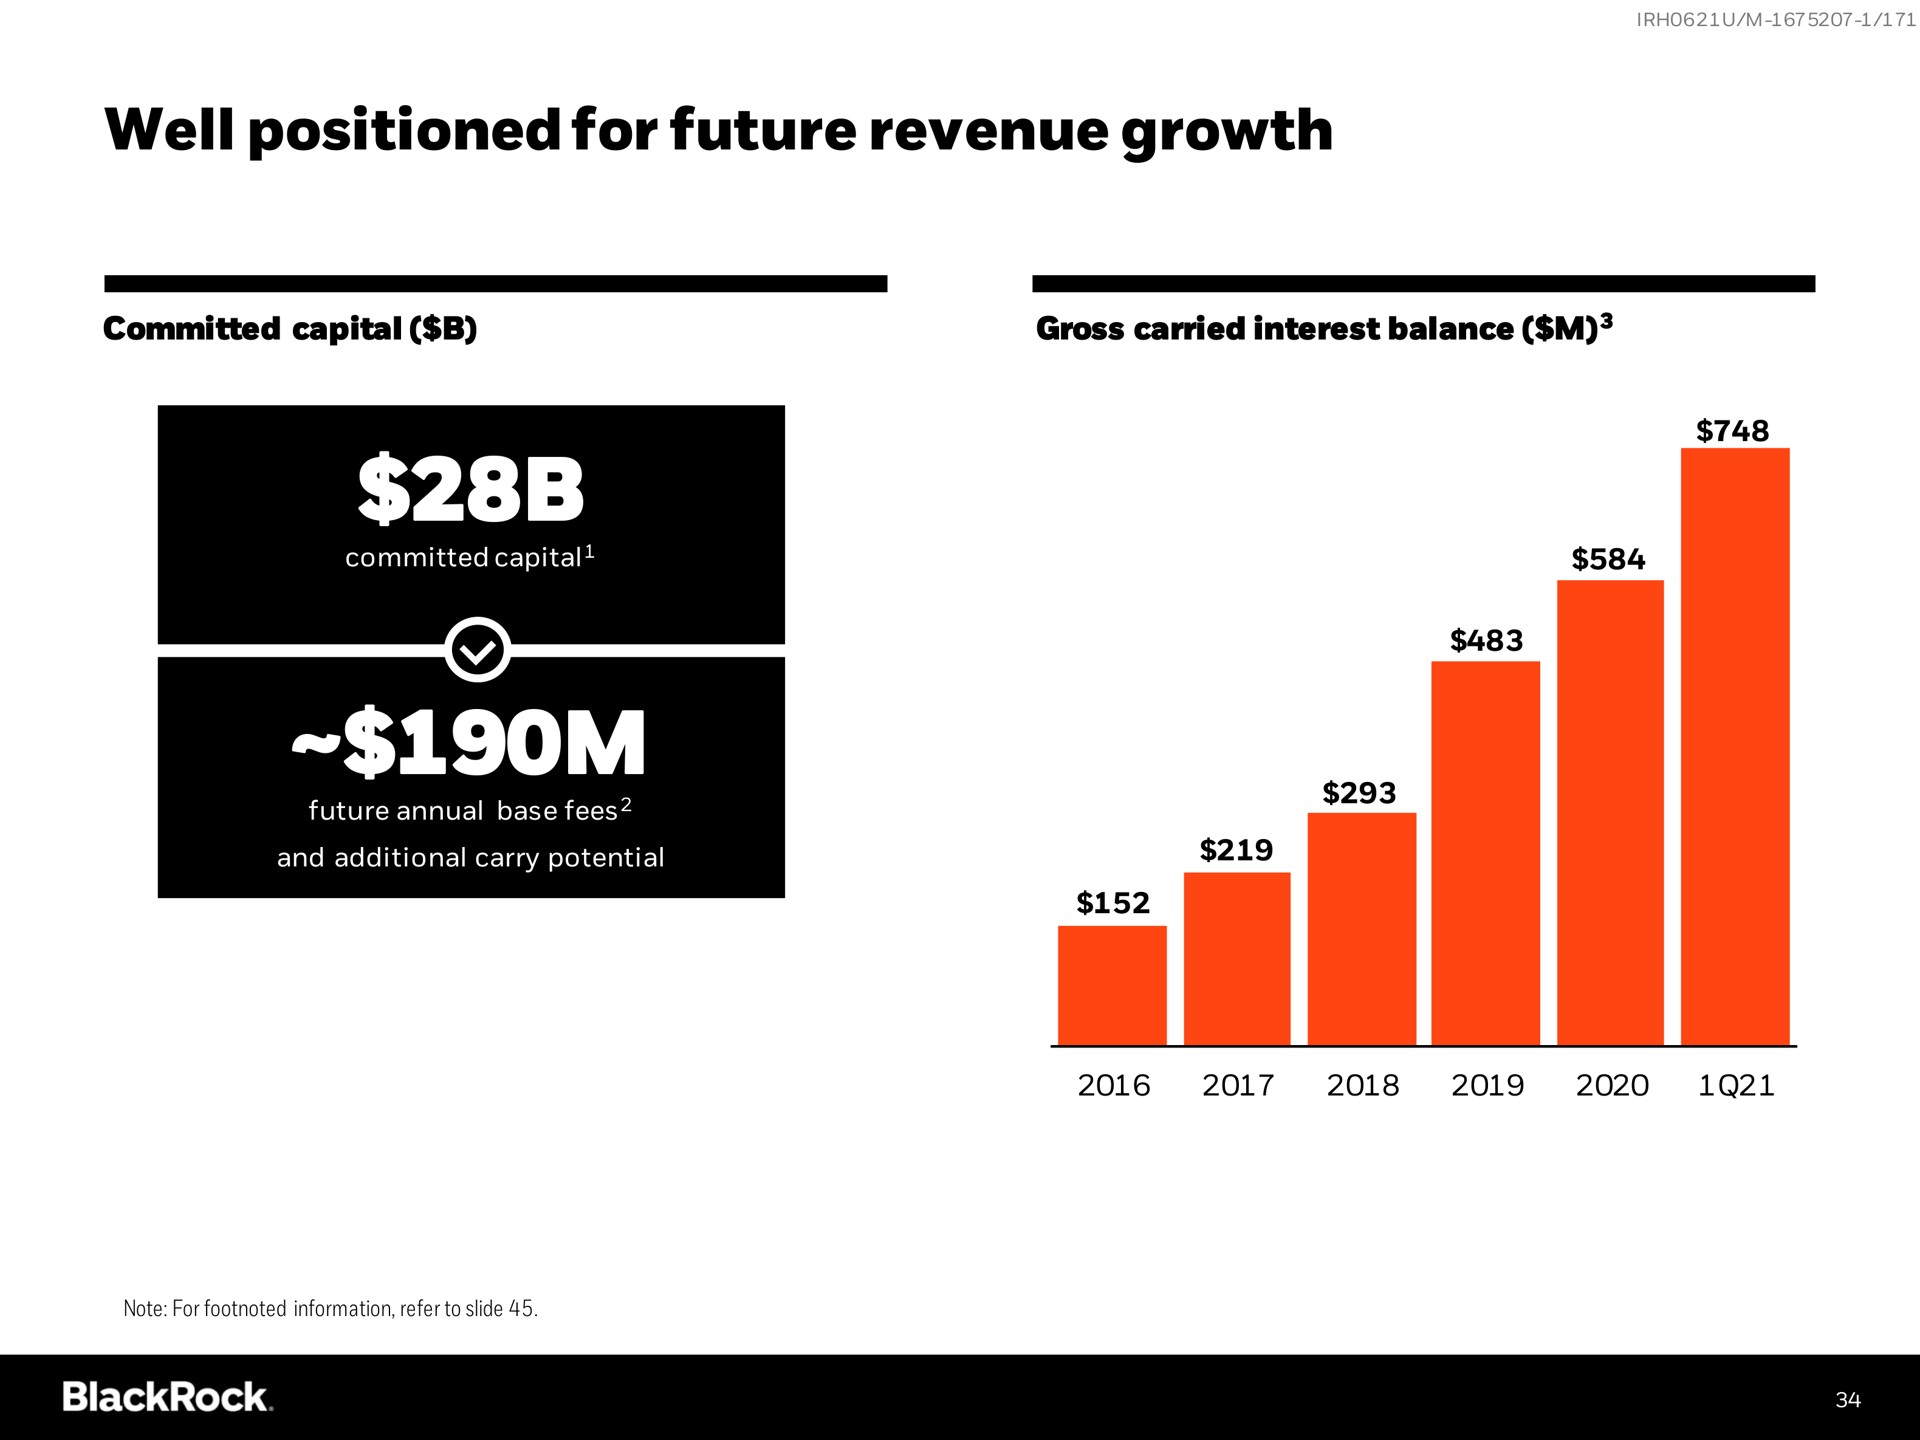 well positioned for future revenue growth | BlackRock